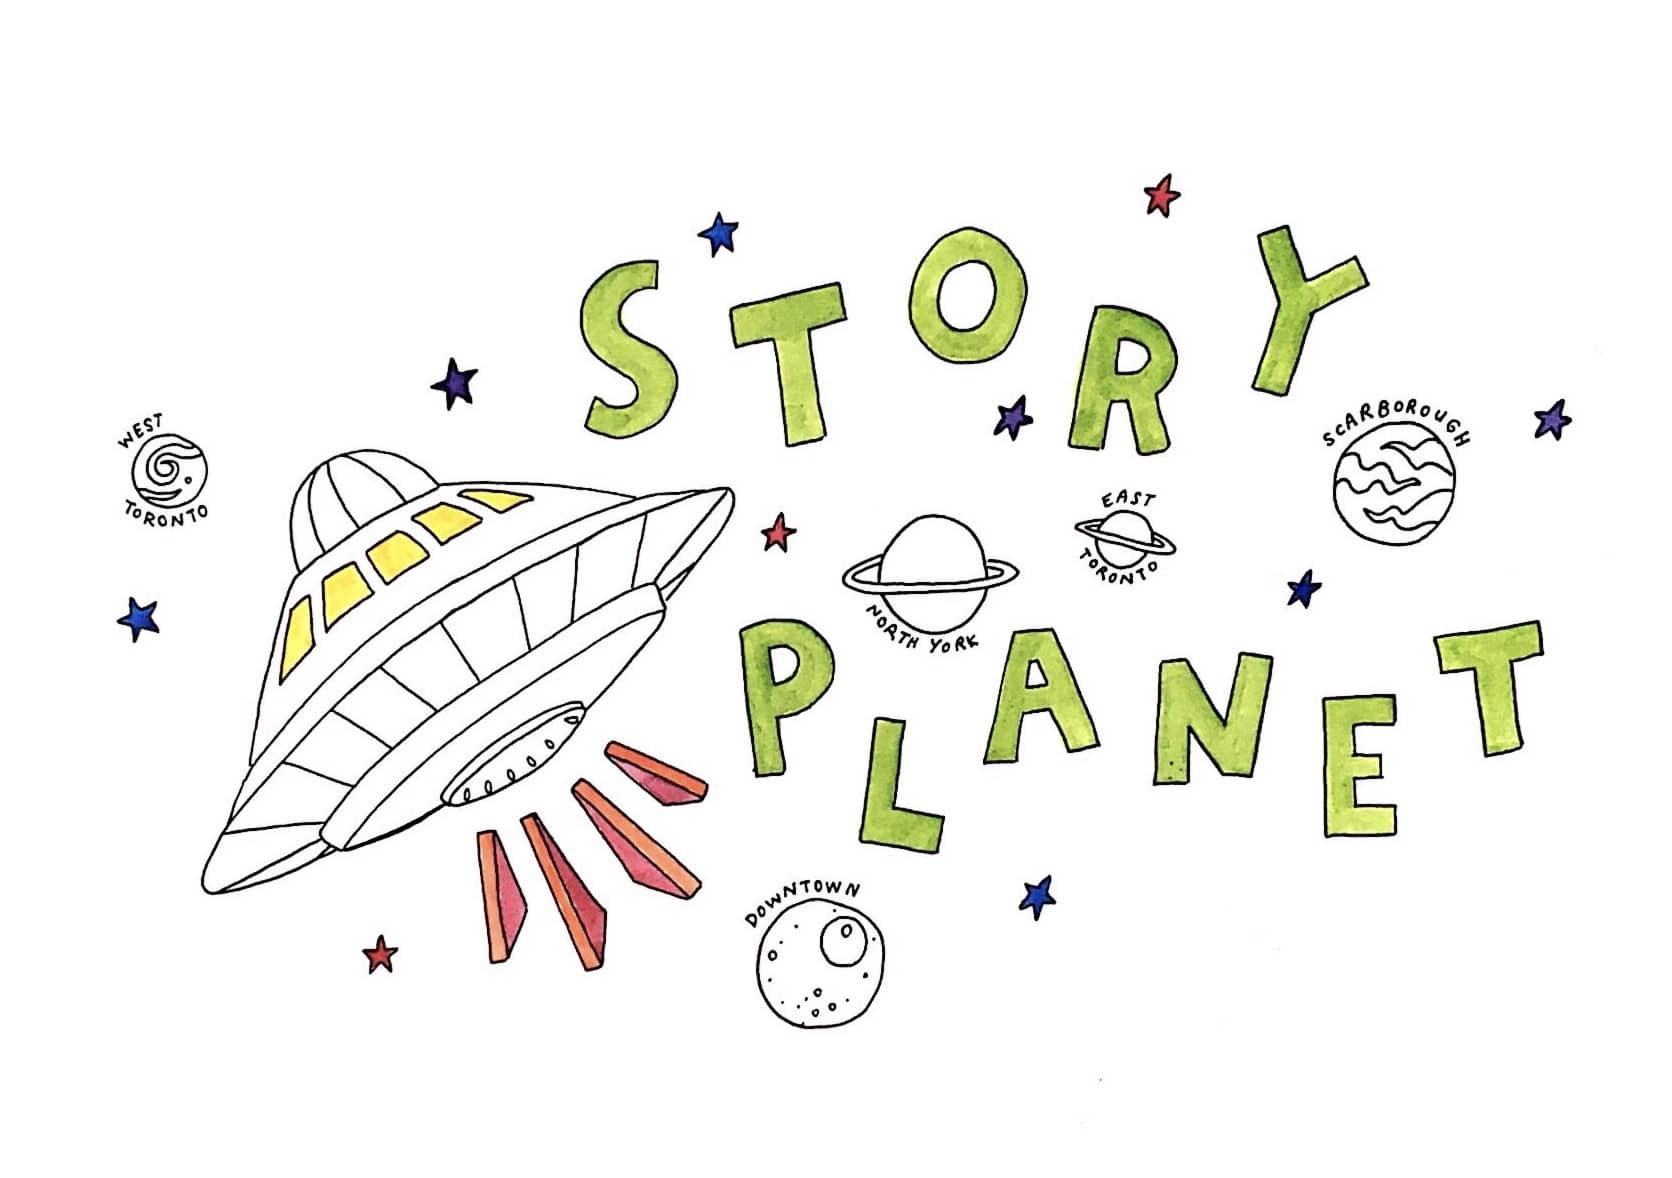 A drawing of a UFO next to the words "Story Planet", and surrounded by planets, each labelled to represent an area of Toronto